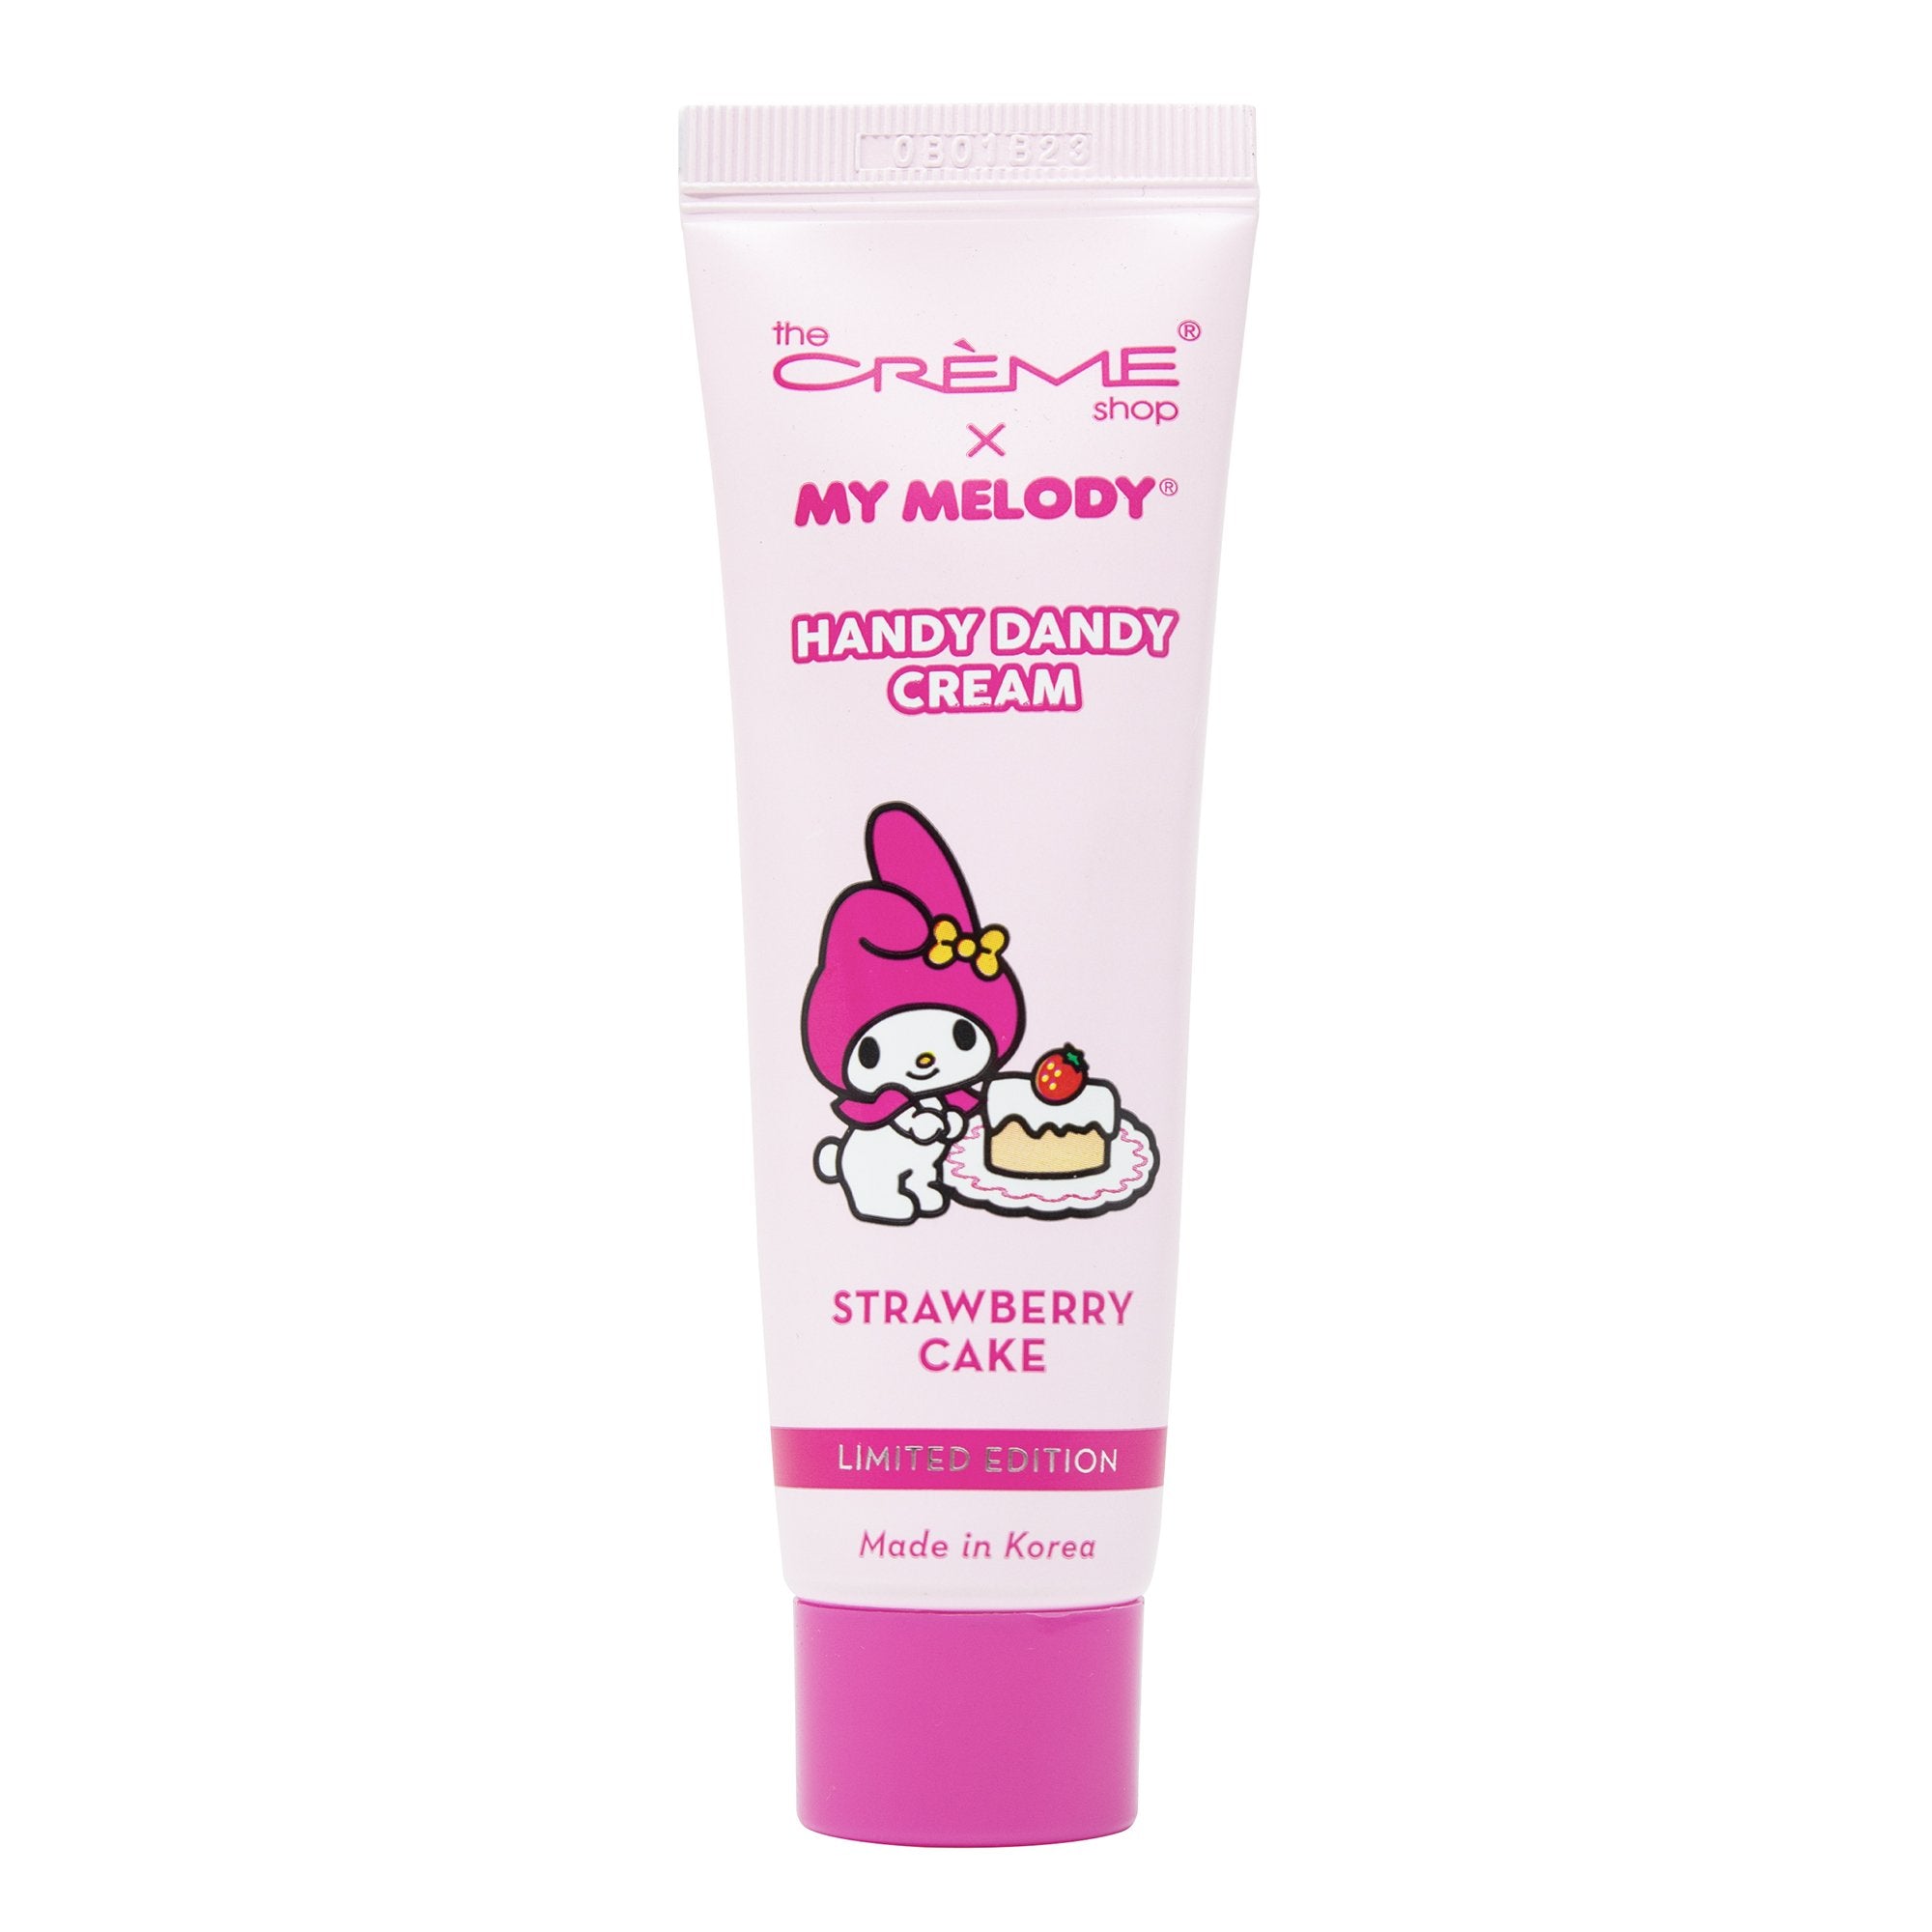 The Crème Shop x My Melody Handy Dandy Cream (Limited Edition) | Strawberry Cake (Travel-Sized)